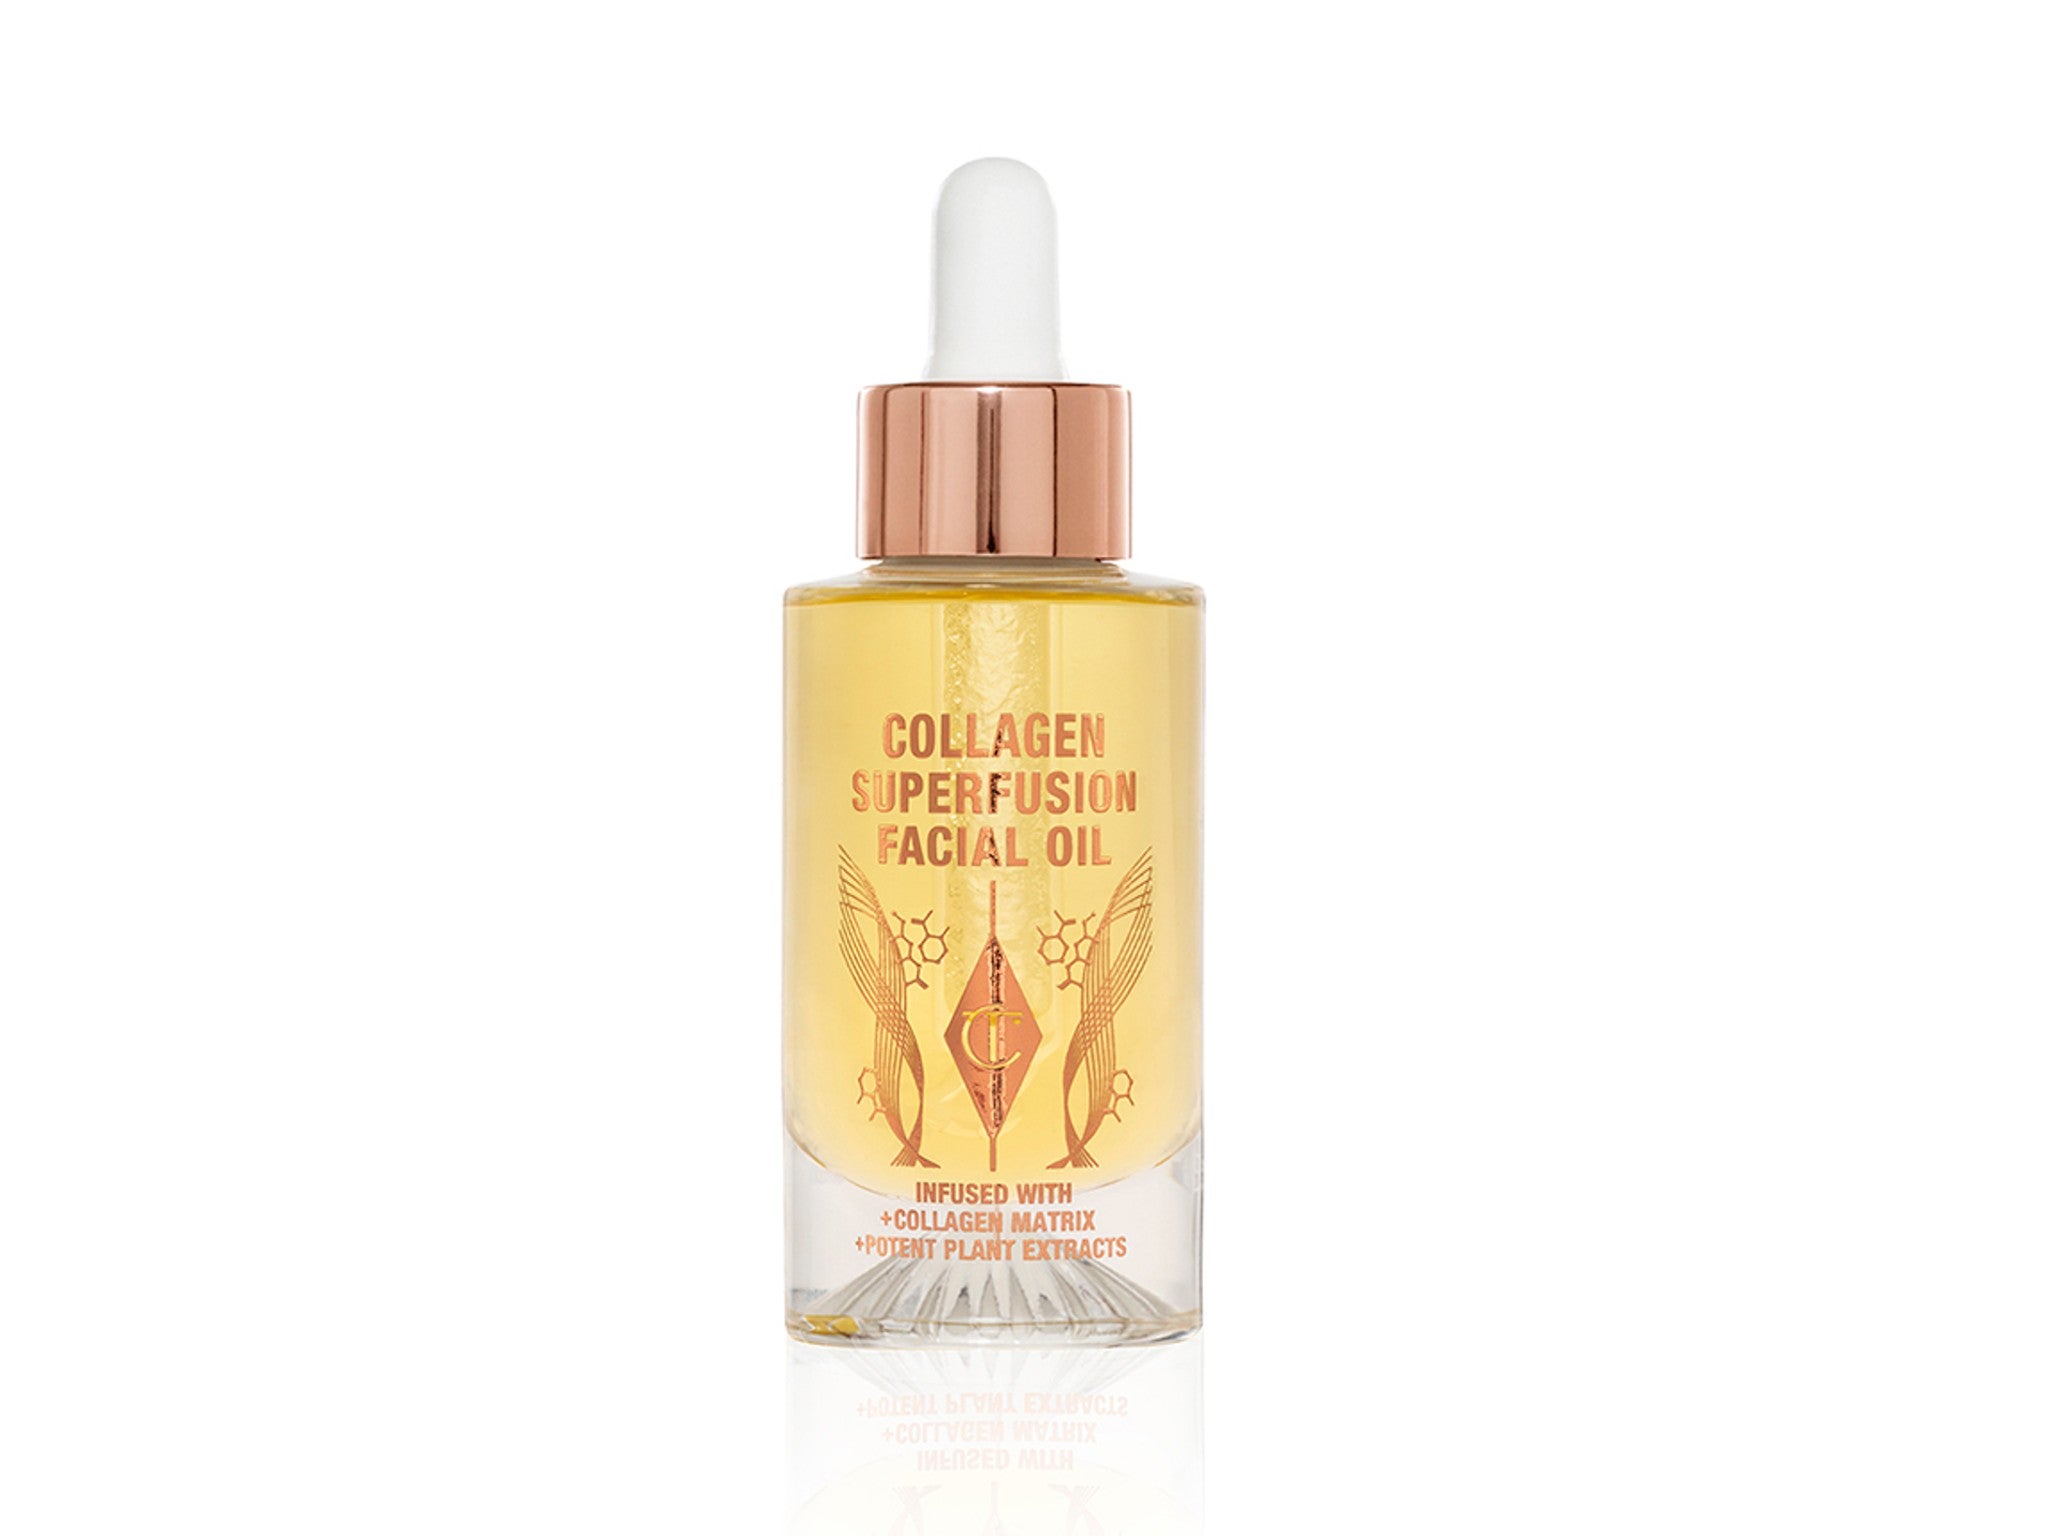 Charlotte Tilbury collagen superfusion face oil indybest.jpg